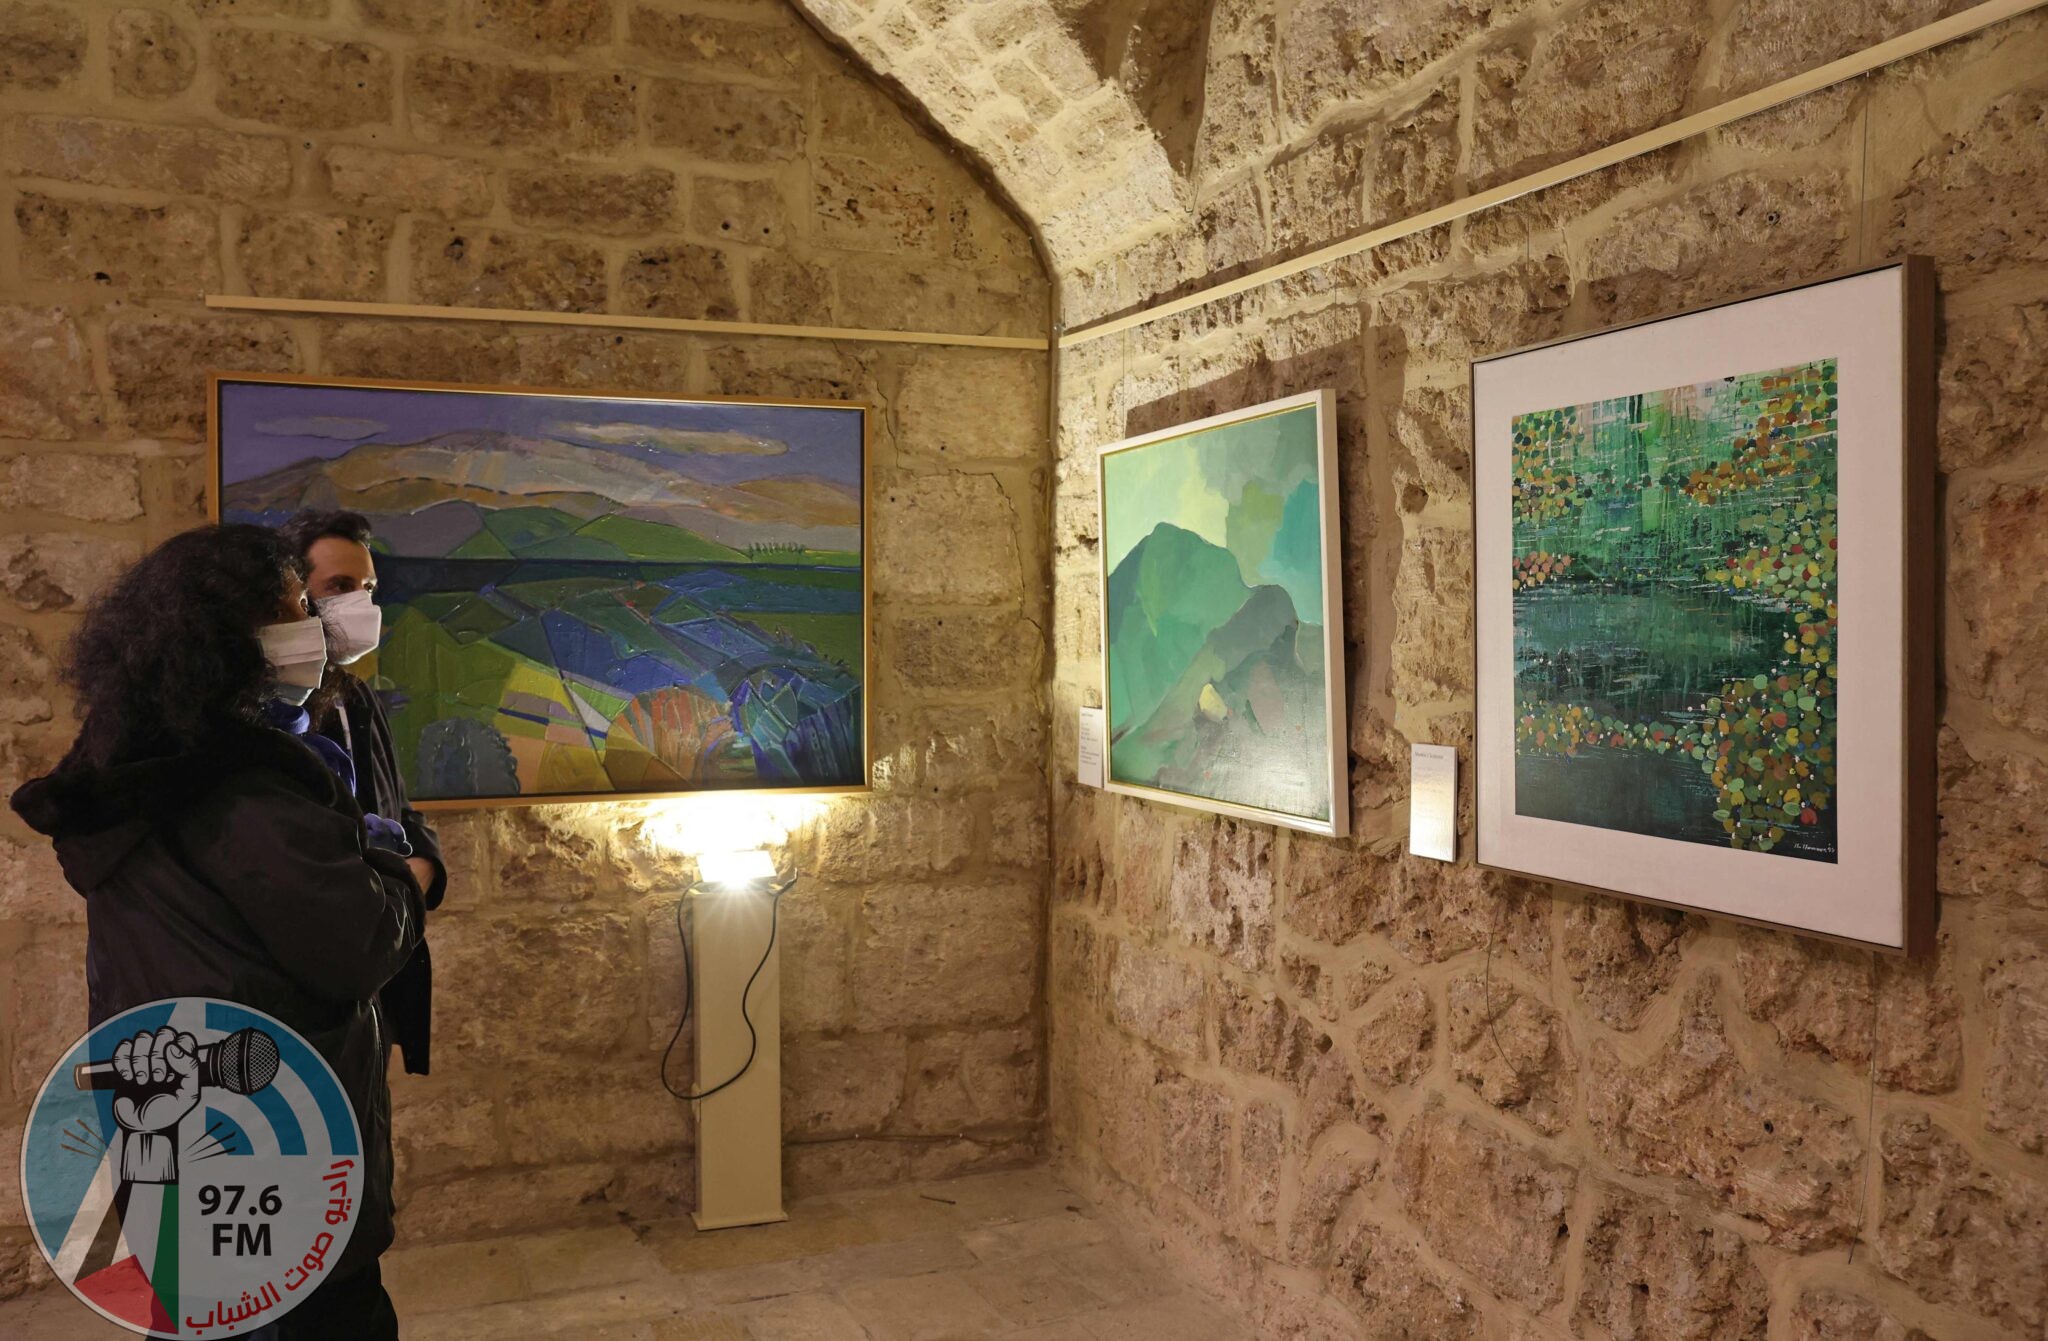 Visitors look at a paintings by Lebanese artists Shawki Chamoun (C) and Jamil Molaeb (R) during an exhibit showcasing art installations that were restored as part of a UNESCO initiative, after being damaged during the August 4 2020 port blast, at the Beirut Museum of Art in the Lebanese capital on January 20, 2022. - RESTRICTED TO EDITORIAL USE - MANDATORY MENTION OF THE ARTIST UPON PUBLICATION - TO ILLUSTRATE THE EVENT AS SPECIFIED IN THE CAPTION (Photo by ANWAR AMRO / AFP) / RESTRICTED TO EDITORIAL USE - MANDATORY MENTION OF THE ARTIST UPON PUBLICATION - TO ILLUSTRATE THE EVENT AS SPECIFIED IN THE CAPTION